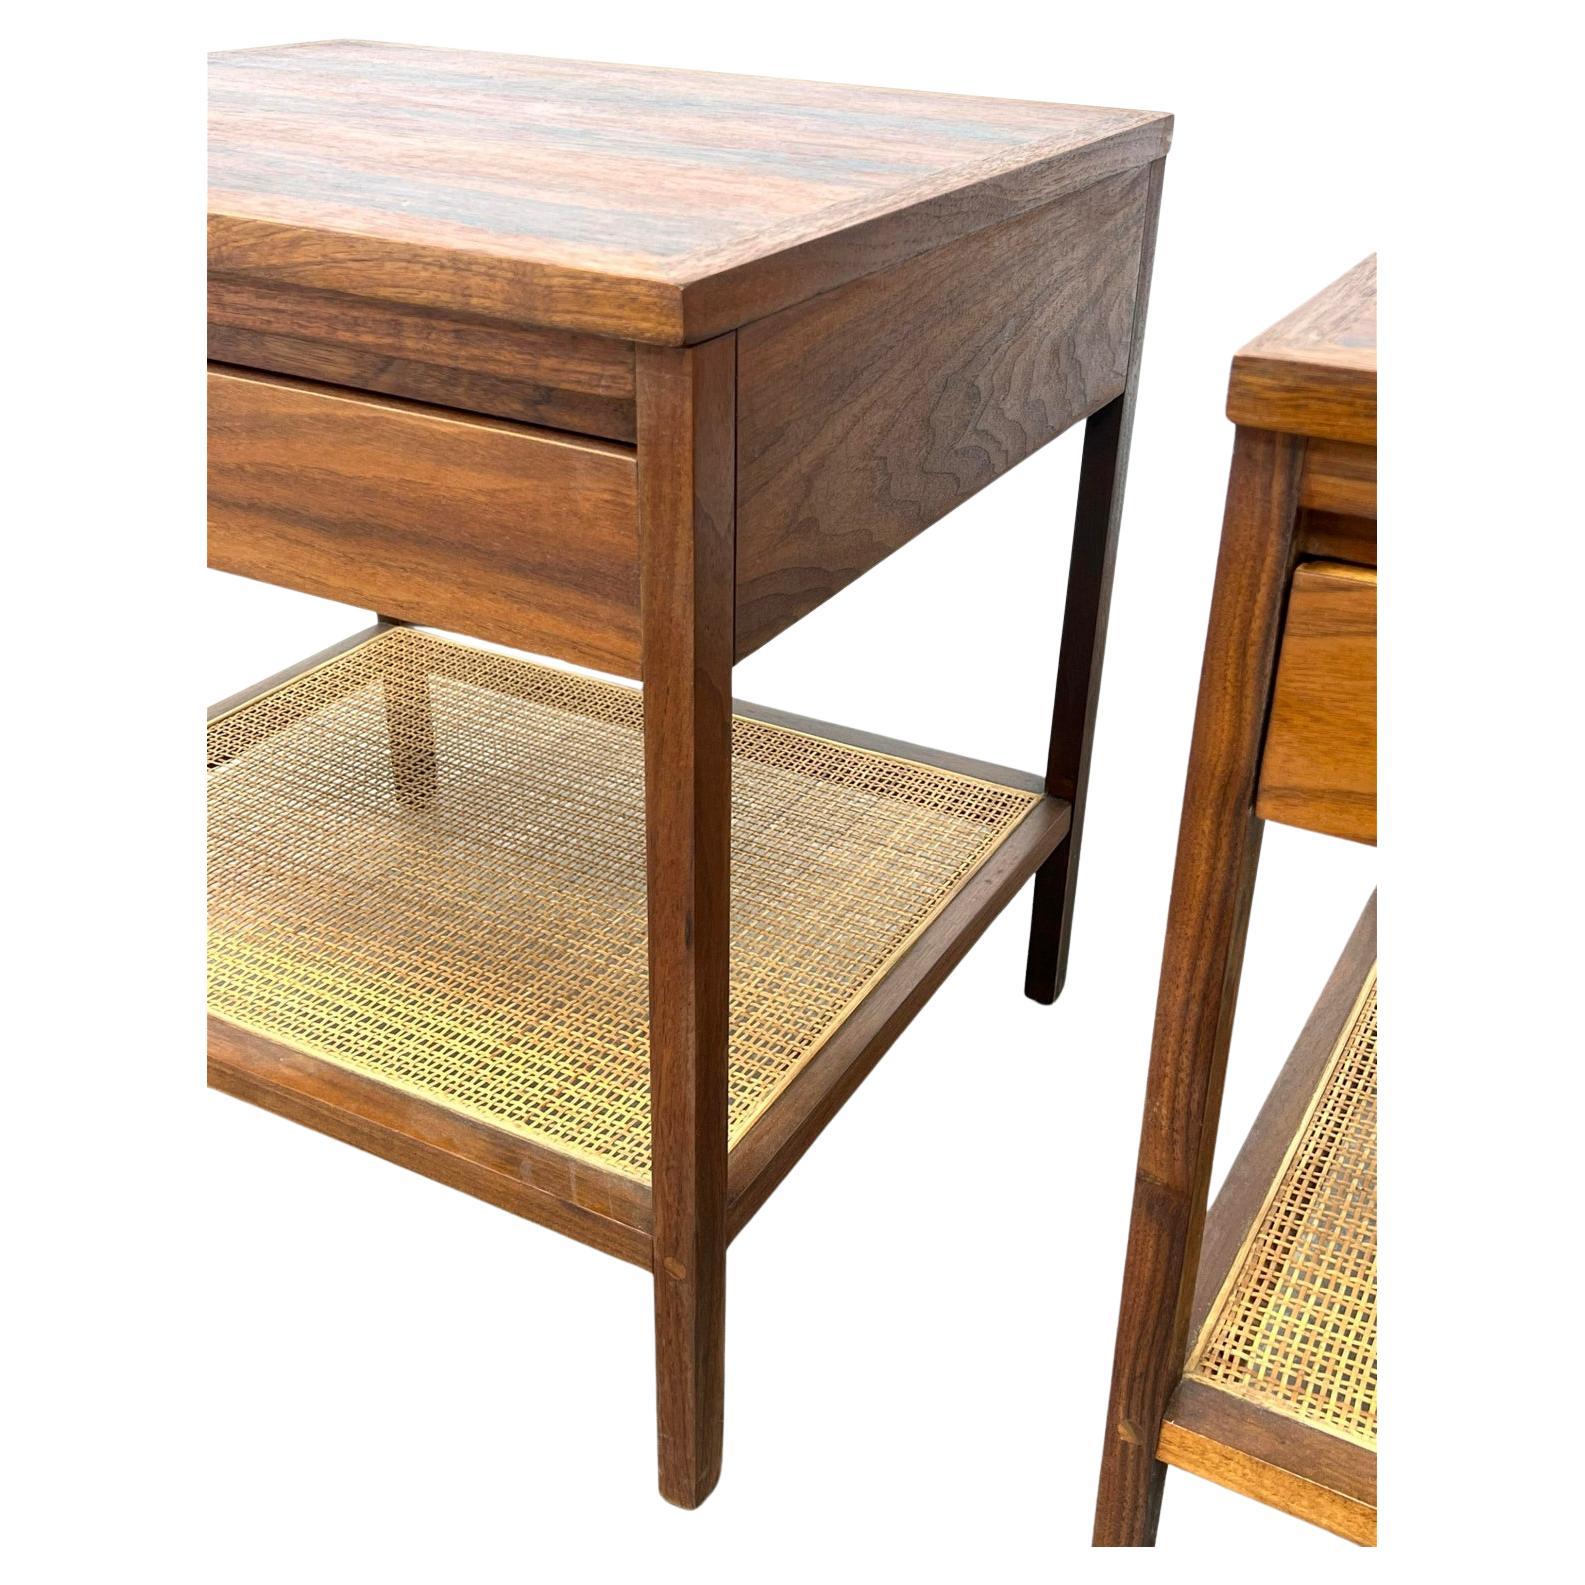 American Pair of Mid century Paul Mccobb for Lane walnut rosewood cane nightstands